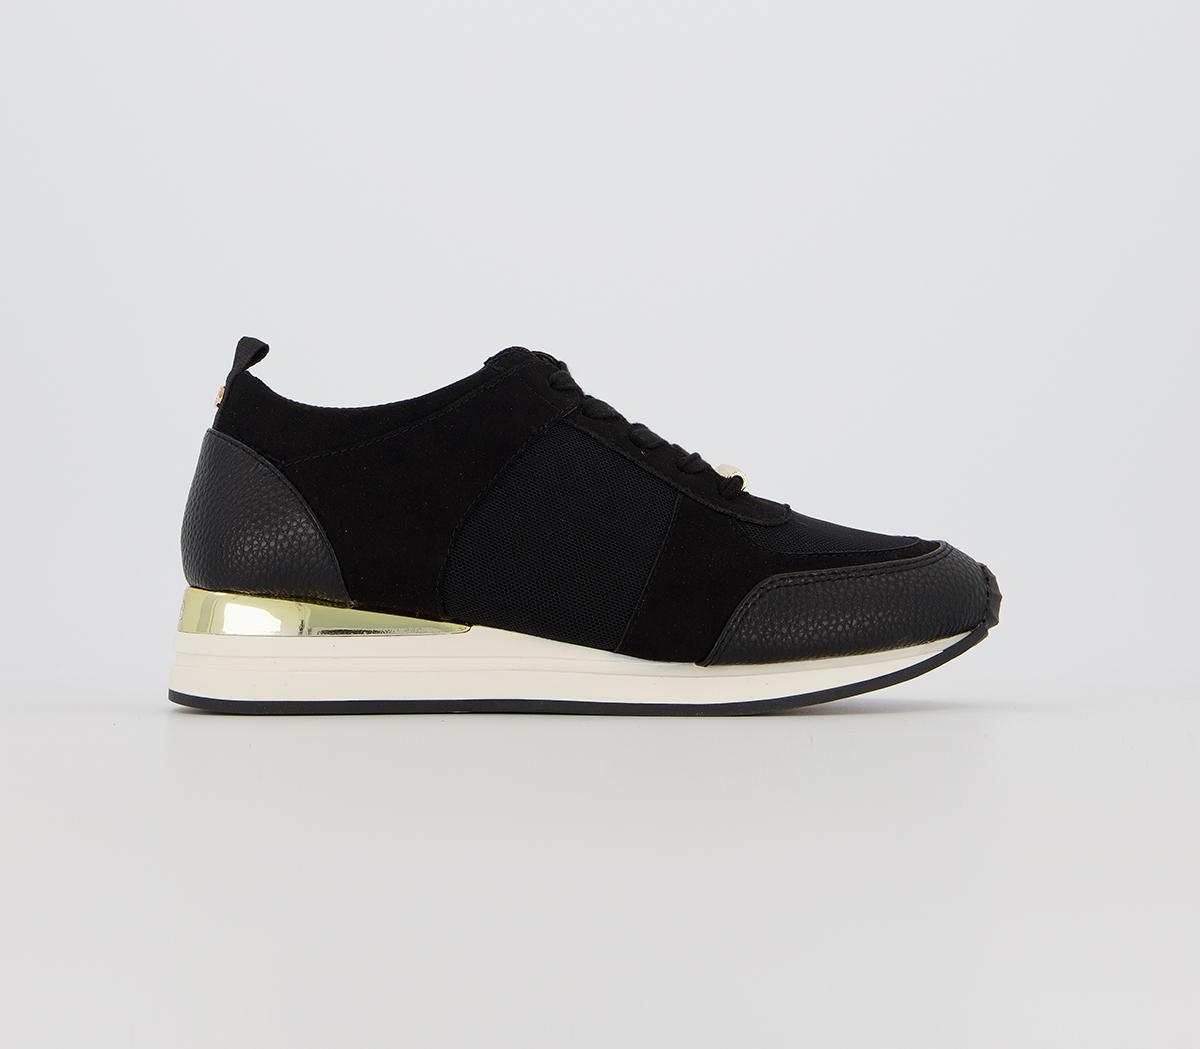 OFFICEFollow Lace Up RunnersBlack Mix Gold Hardware